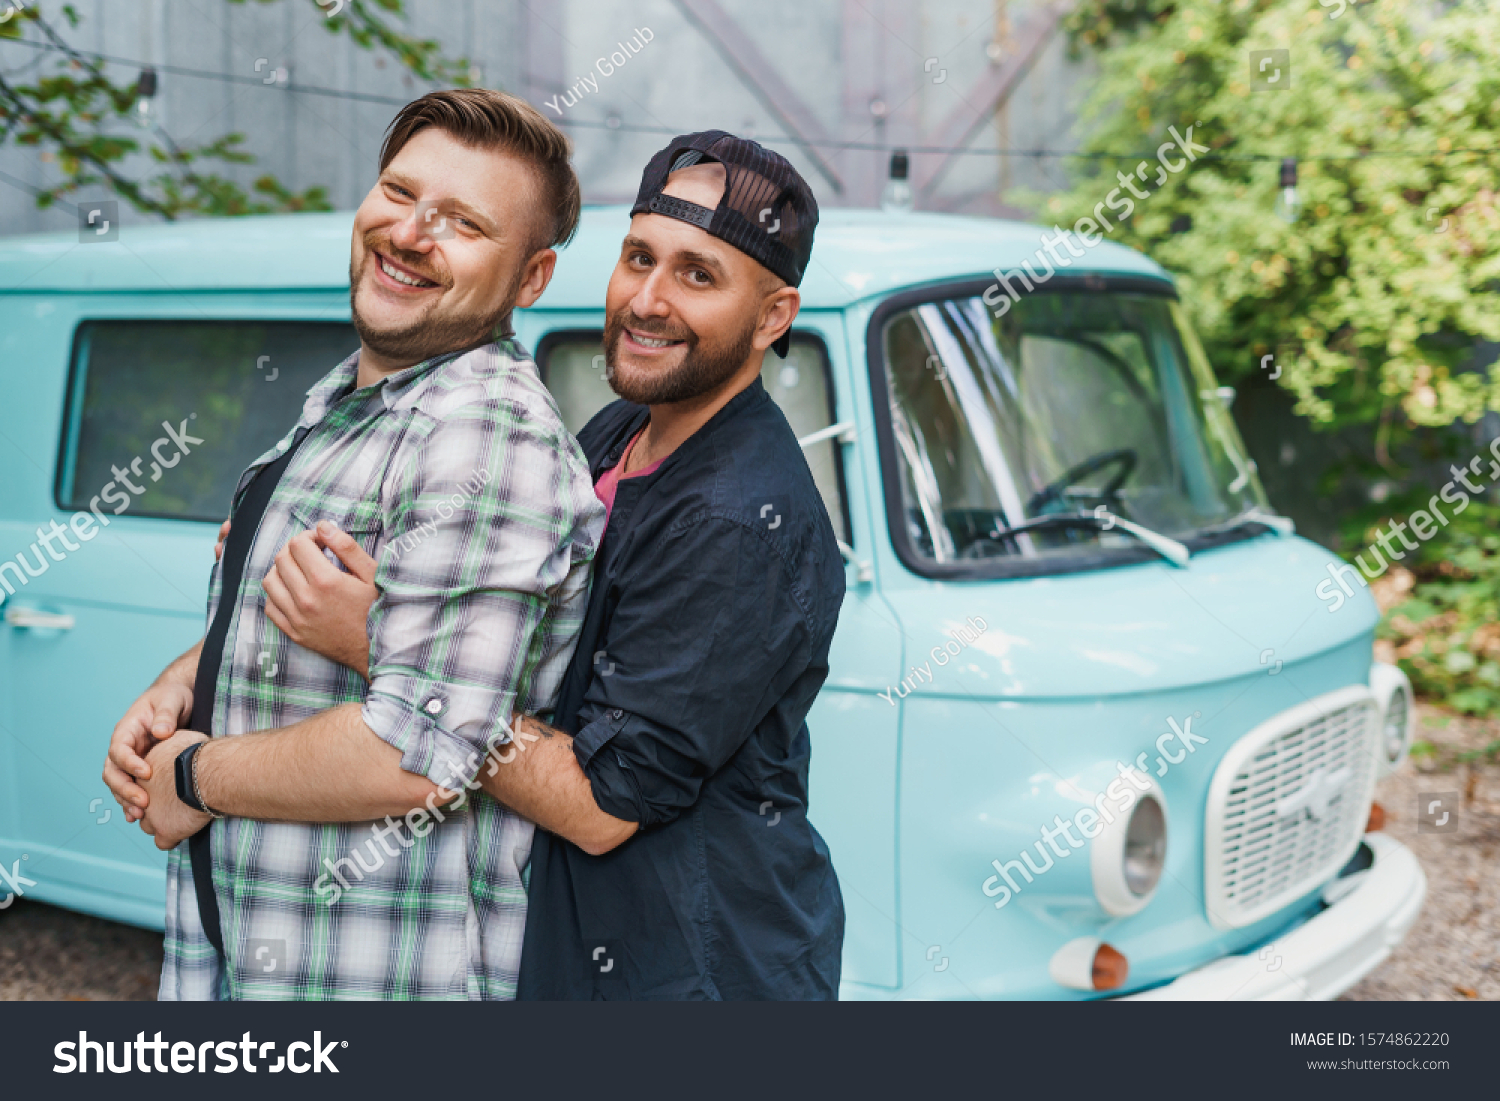 Portrait of a gay couple in front of an old-fashioned car van. Boyfriends hug and smile to the camera. #1574862220